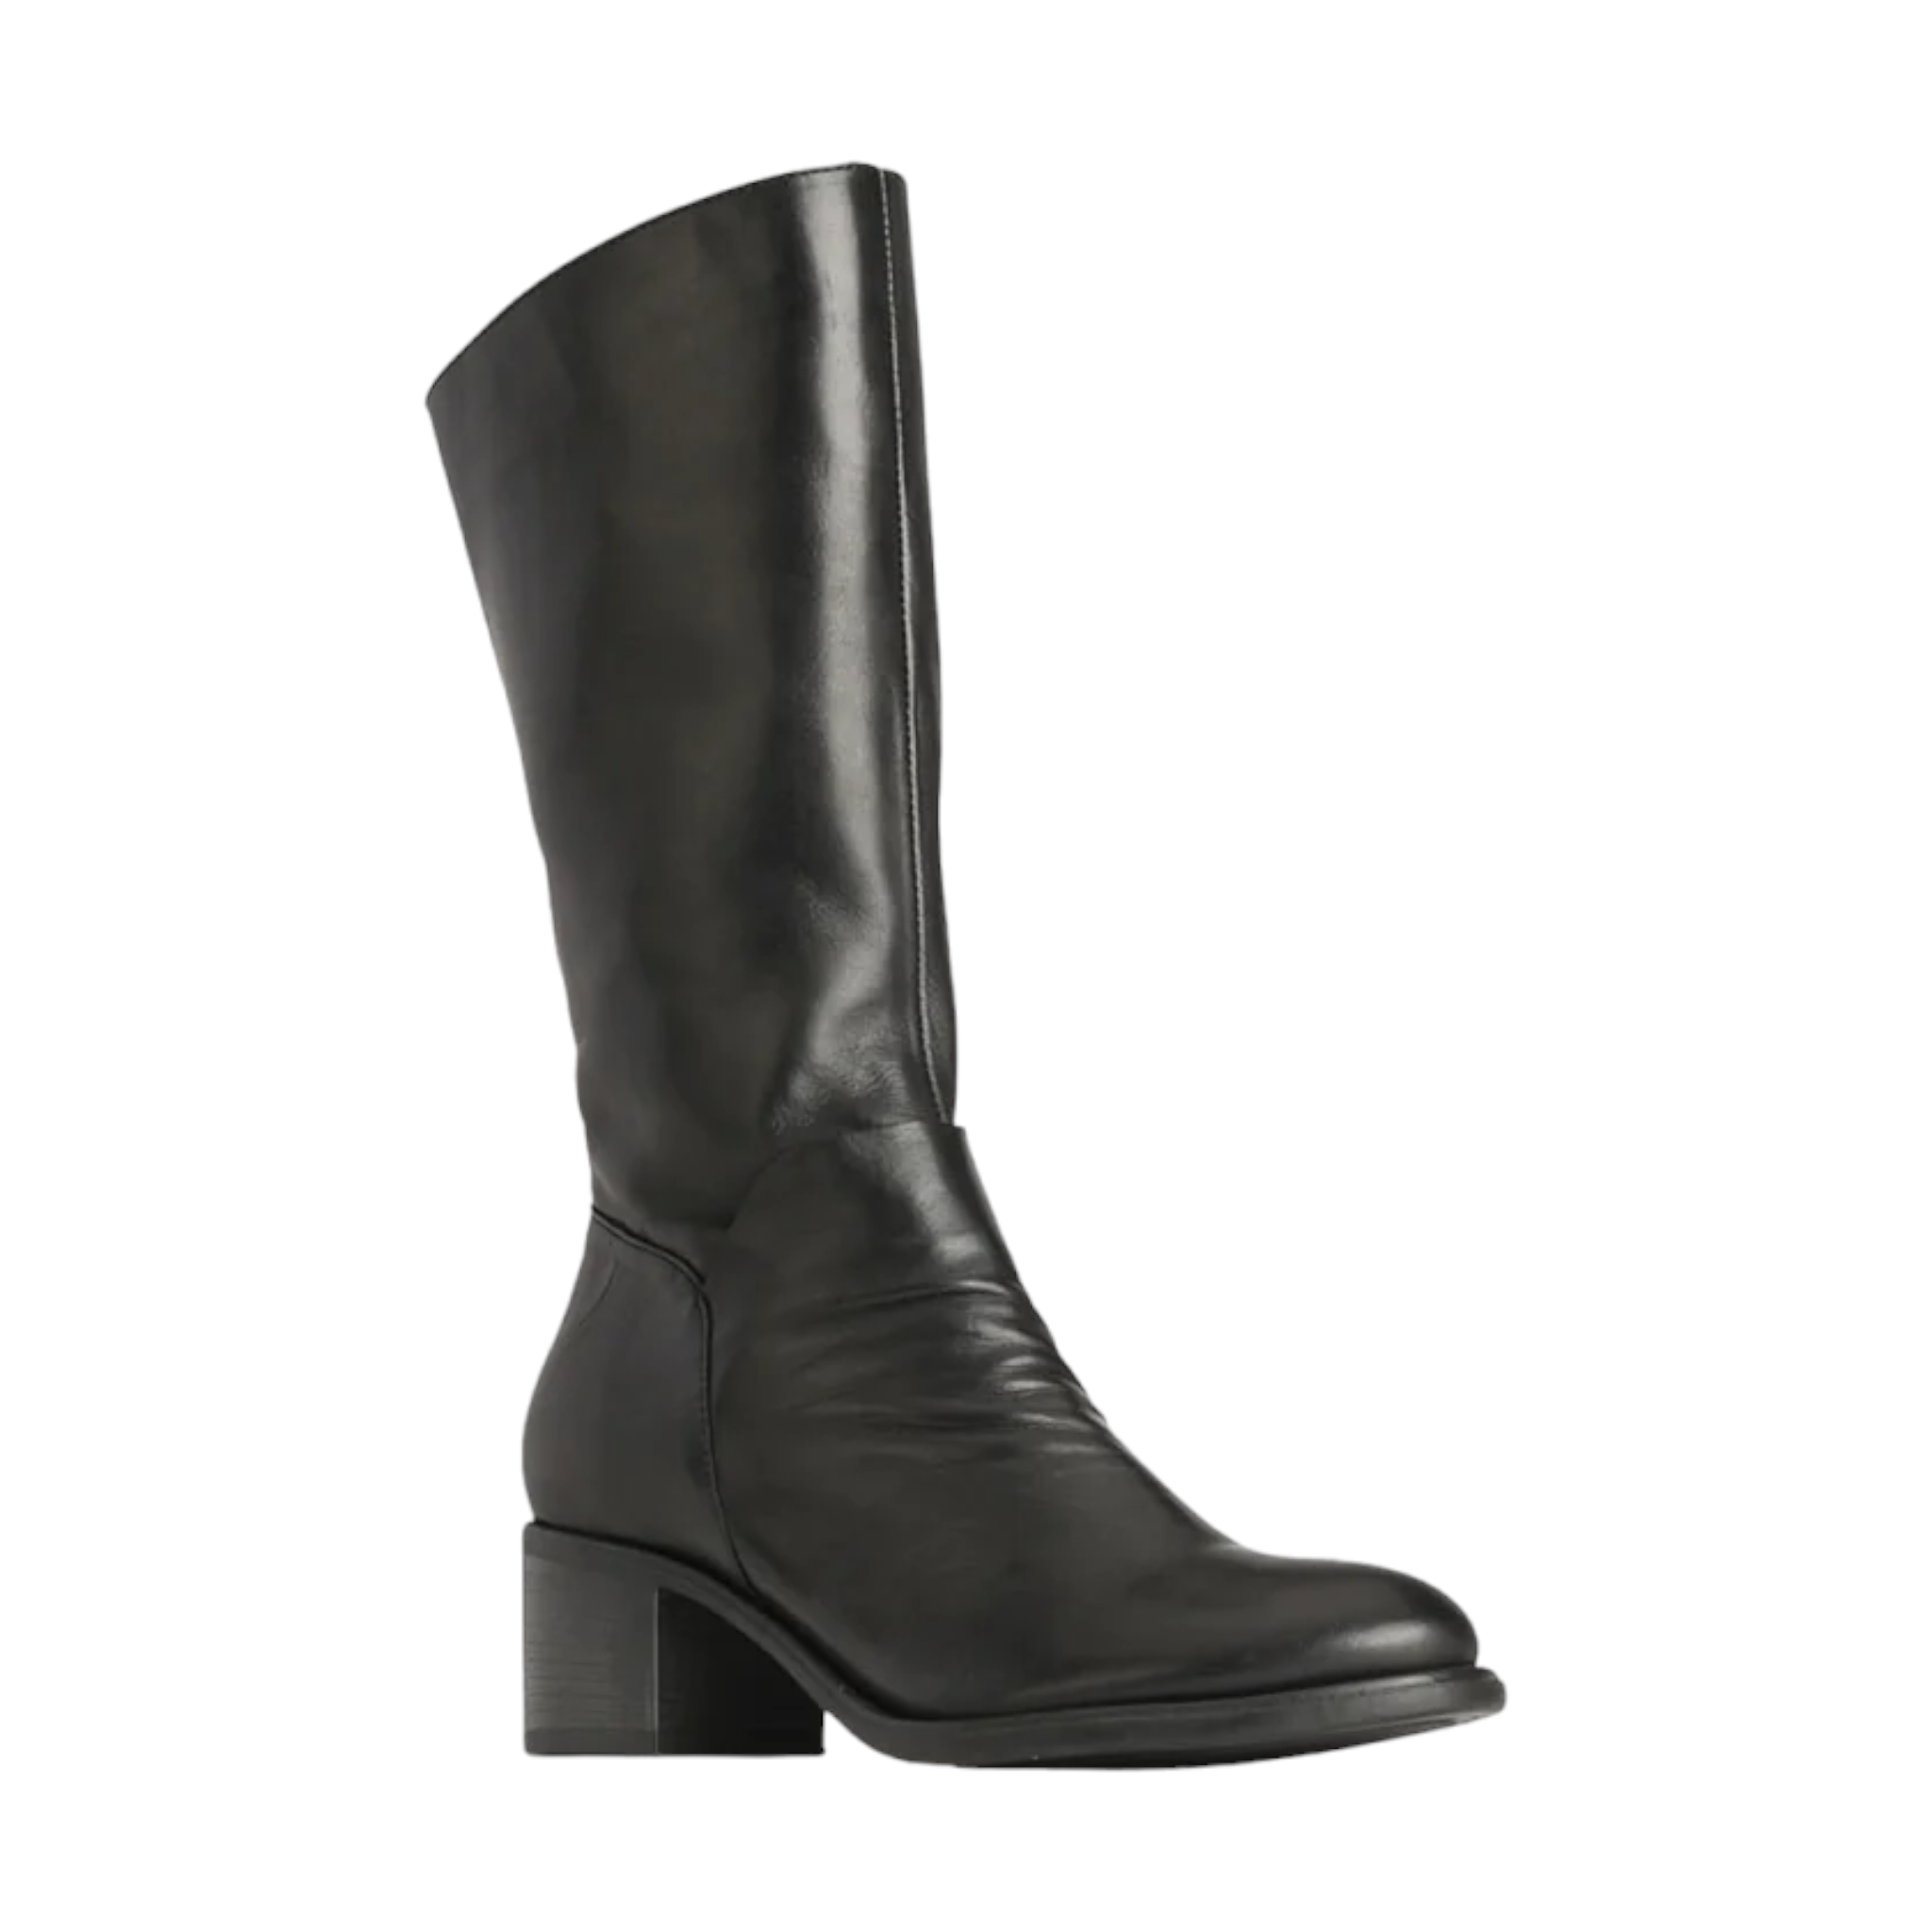 Shop Rochelle EOS - with shoe&me - from EOS - Boots - Boot, Winter, Womens - [collection]